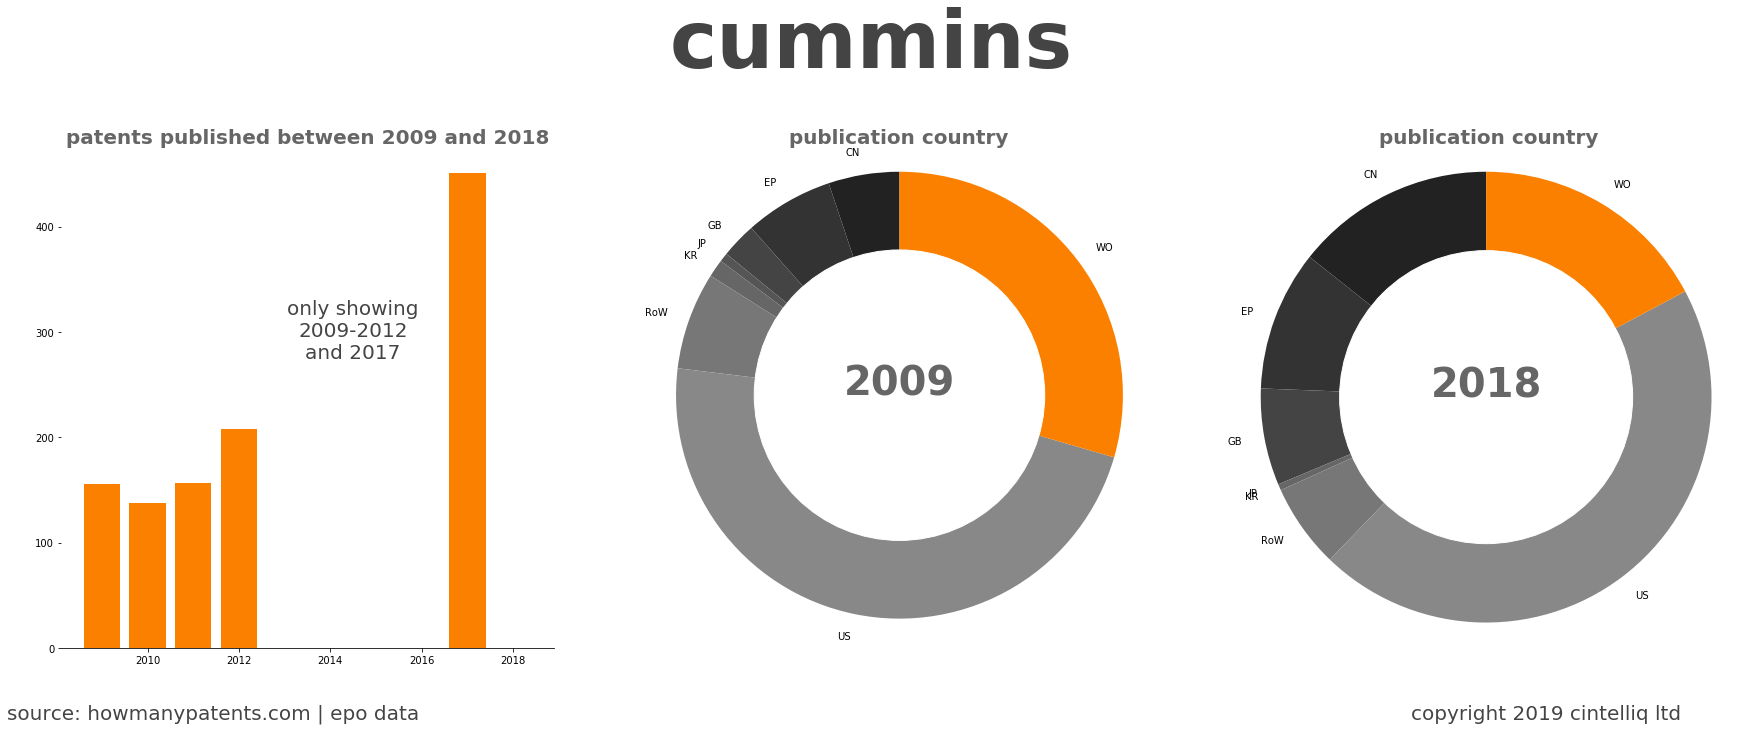 summary of patents for Cummins